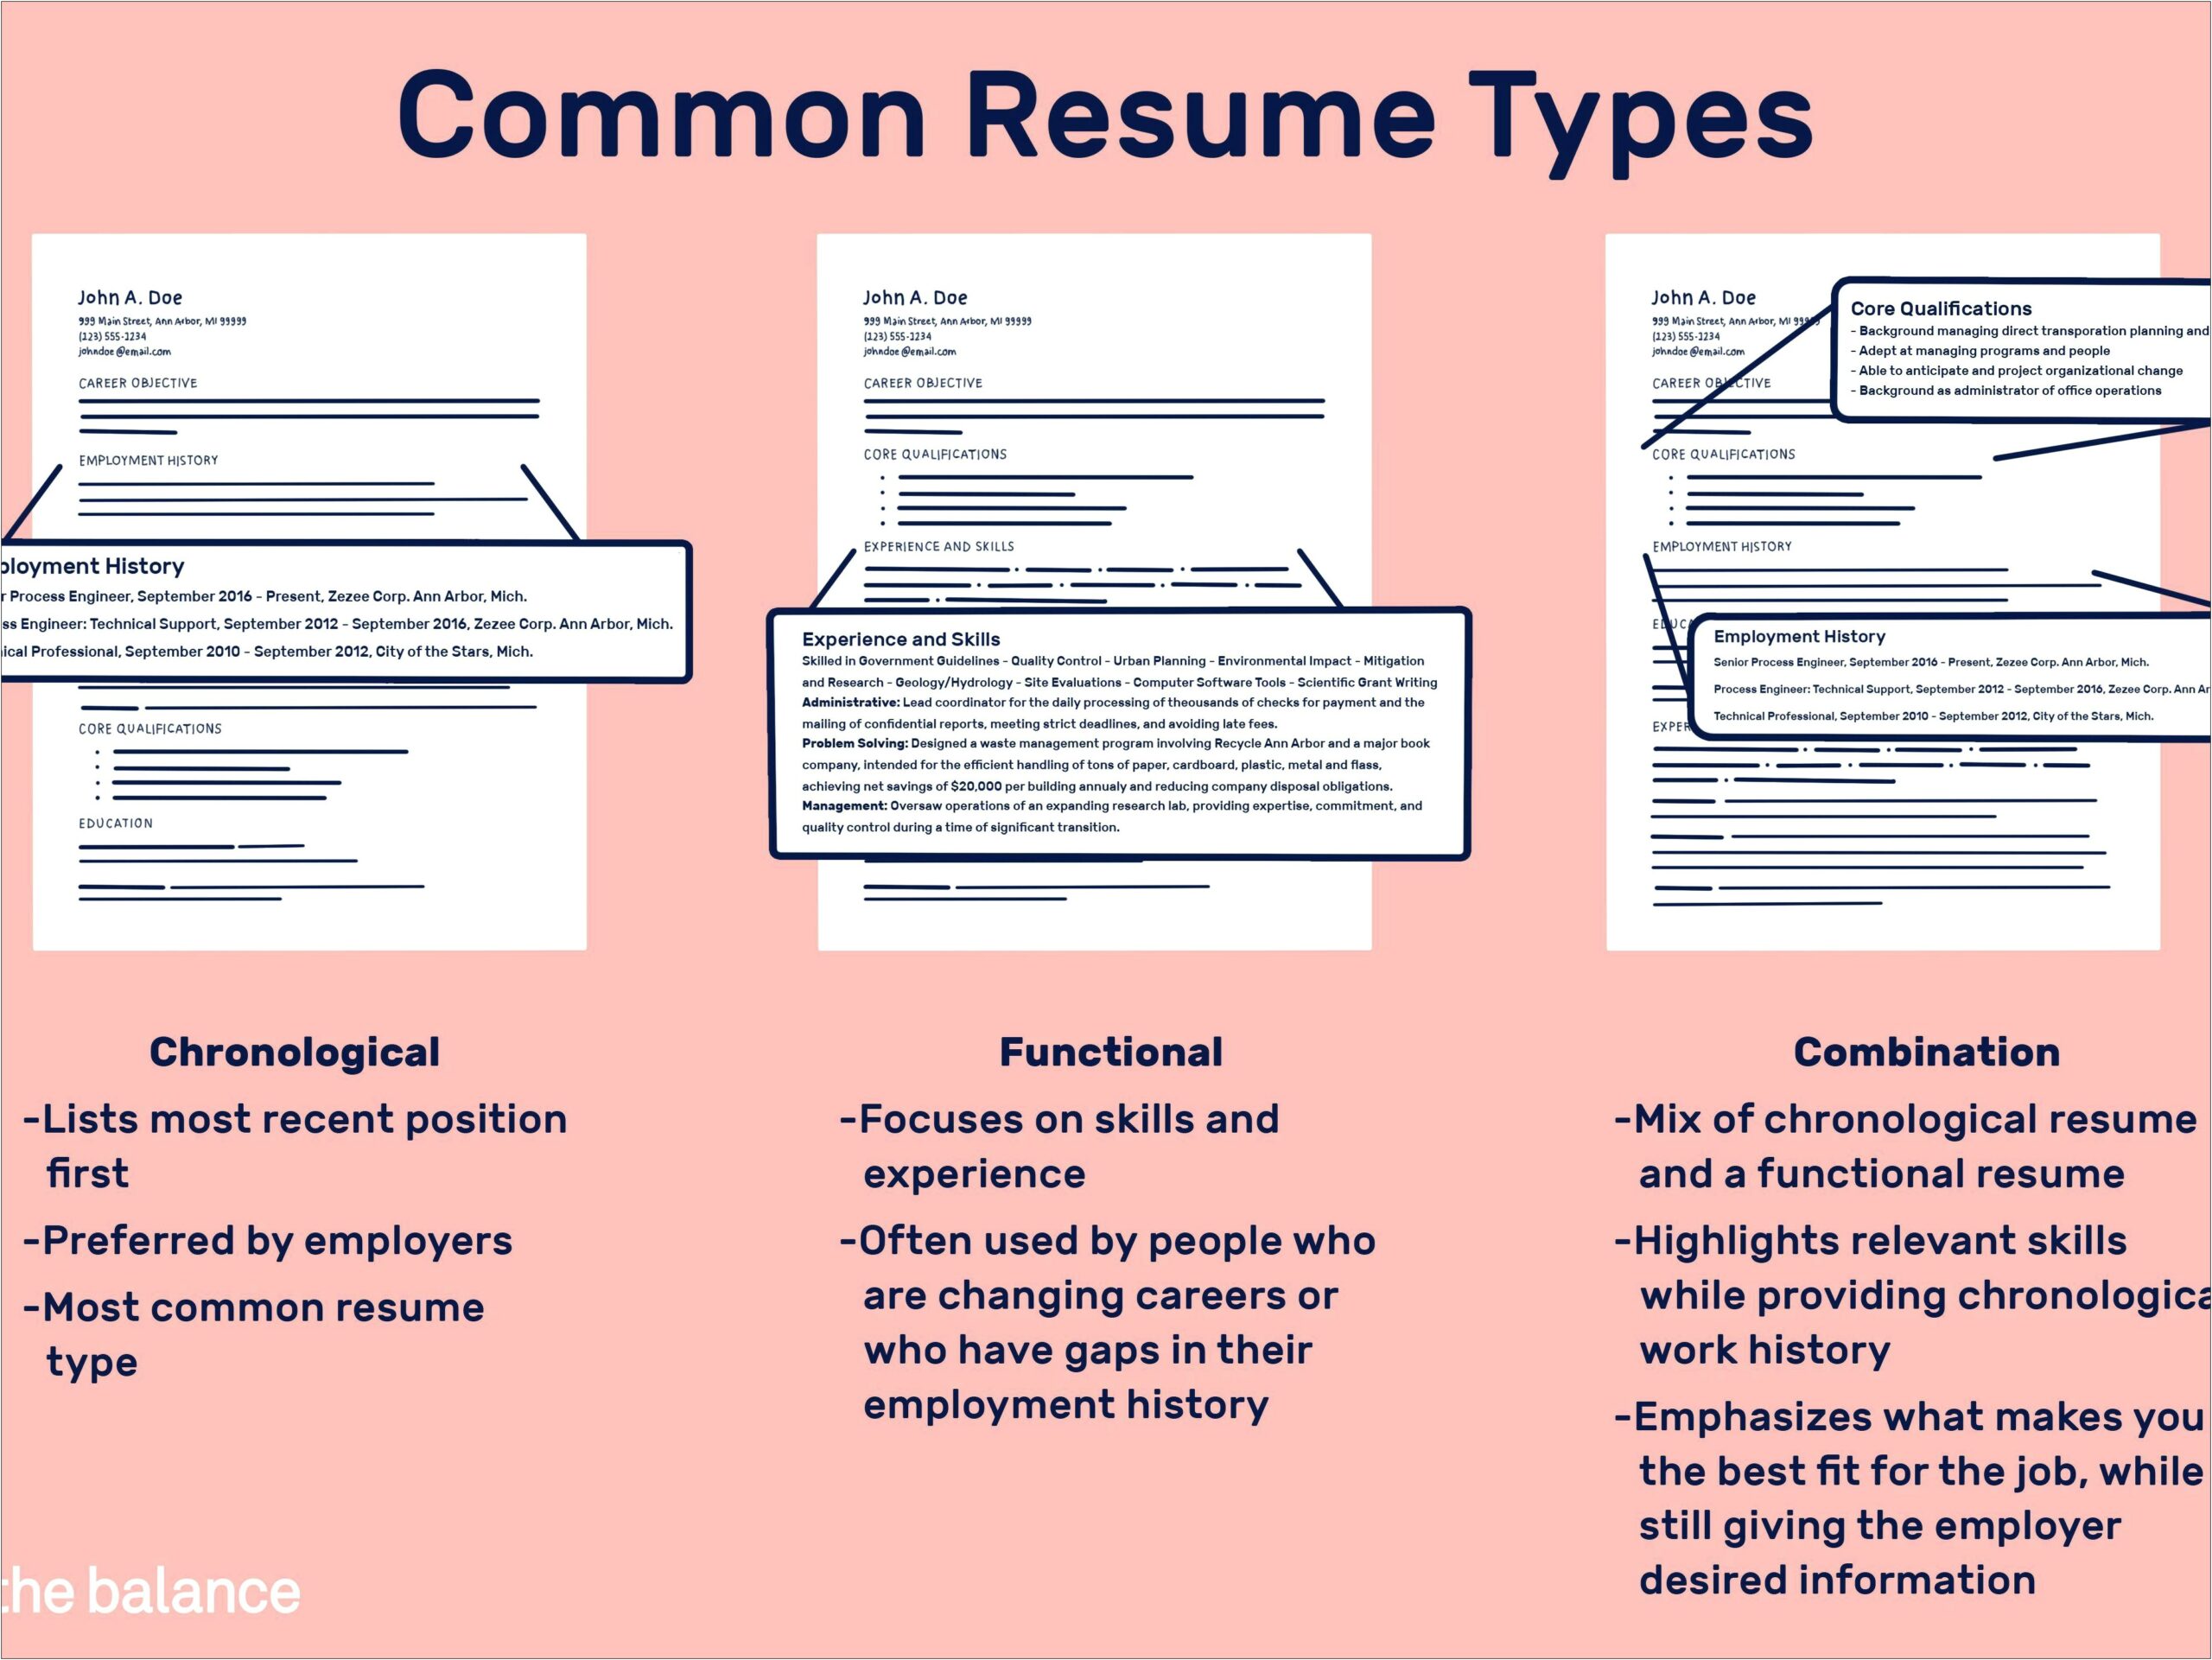 Qualification Highlights On Resume Examples